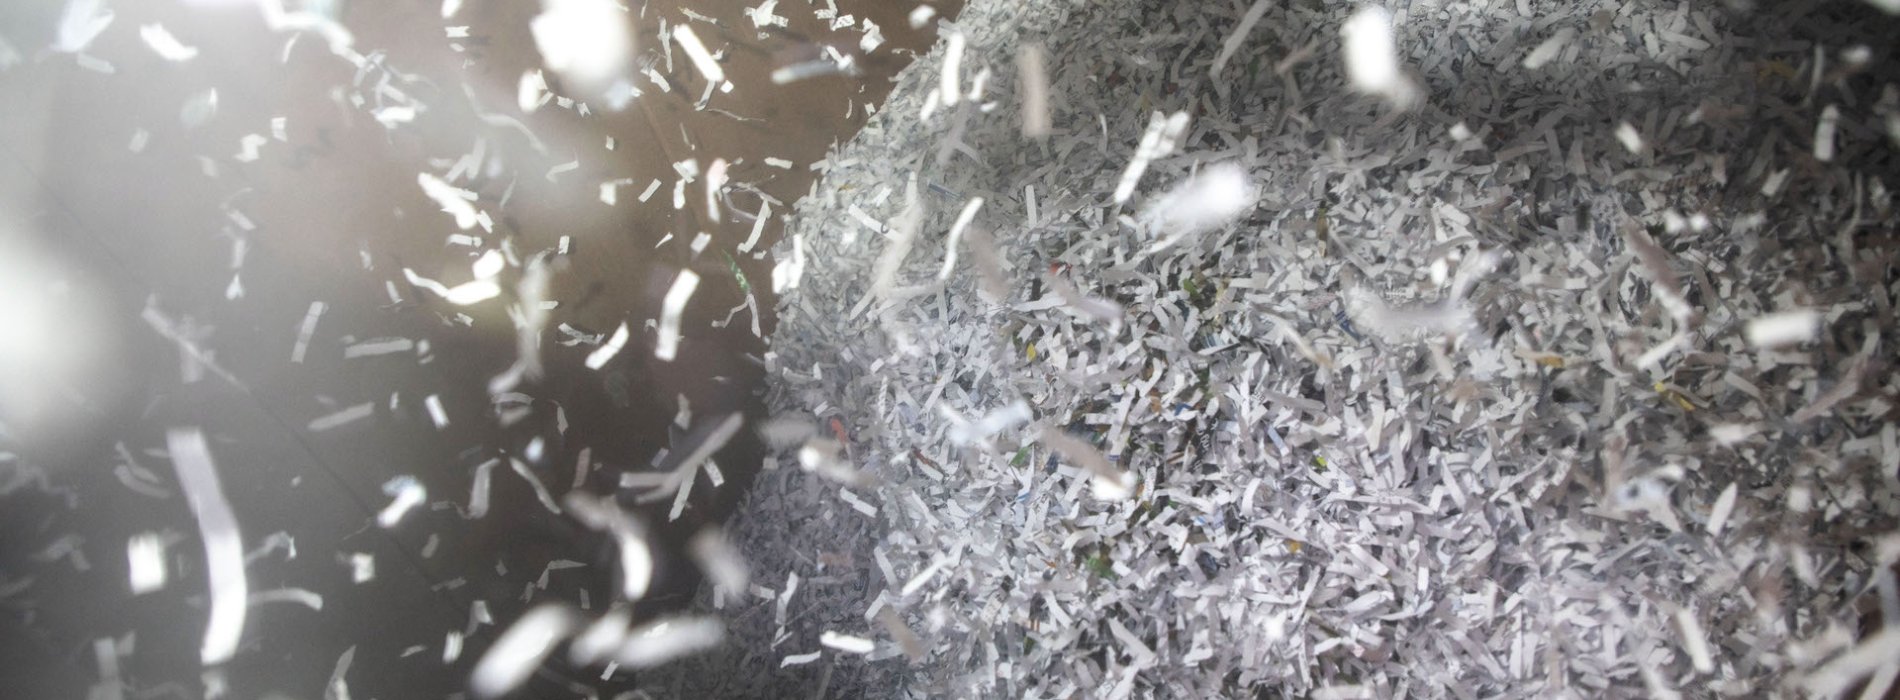 Paper flakes from being shredded from a paper shredder